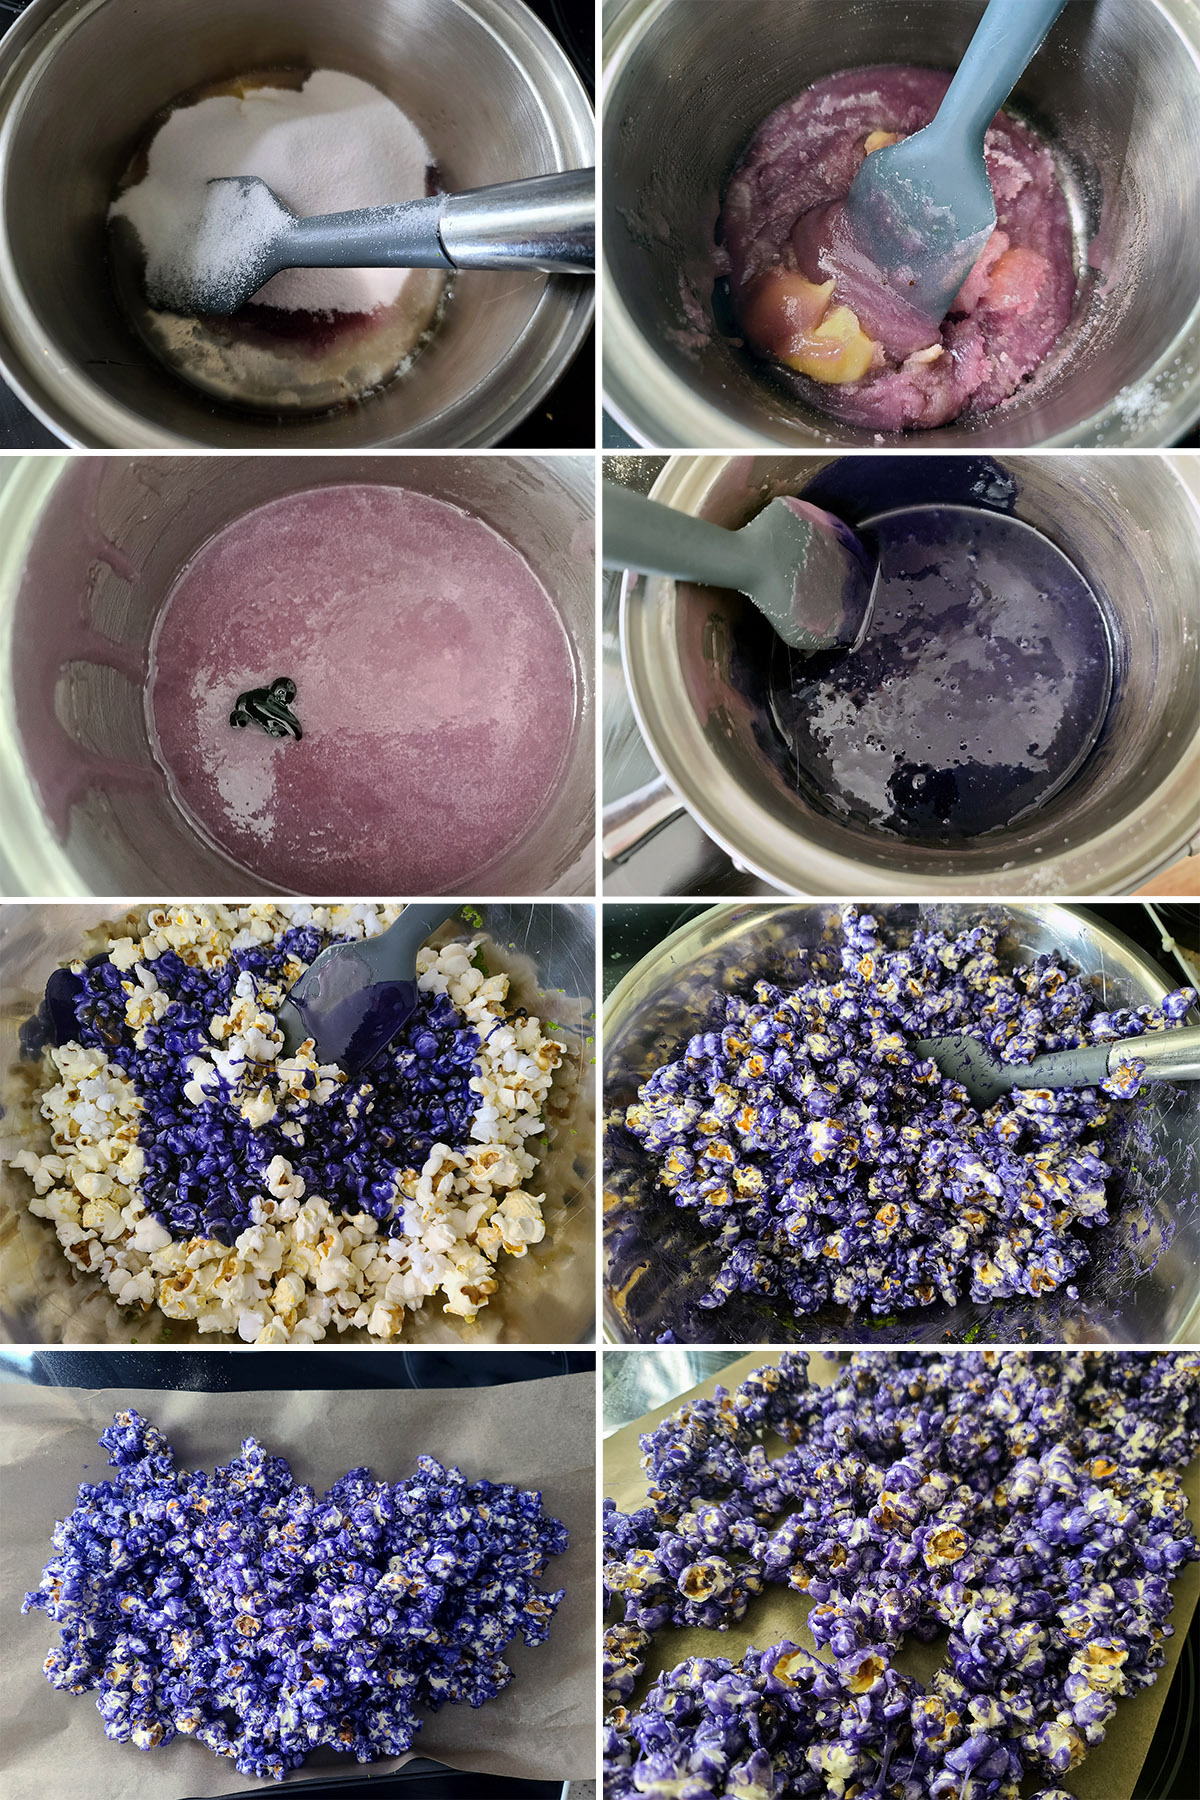 An 9 part image showing the purple glaze being made, poured over the popcorn, and mixed.